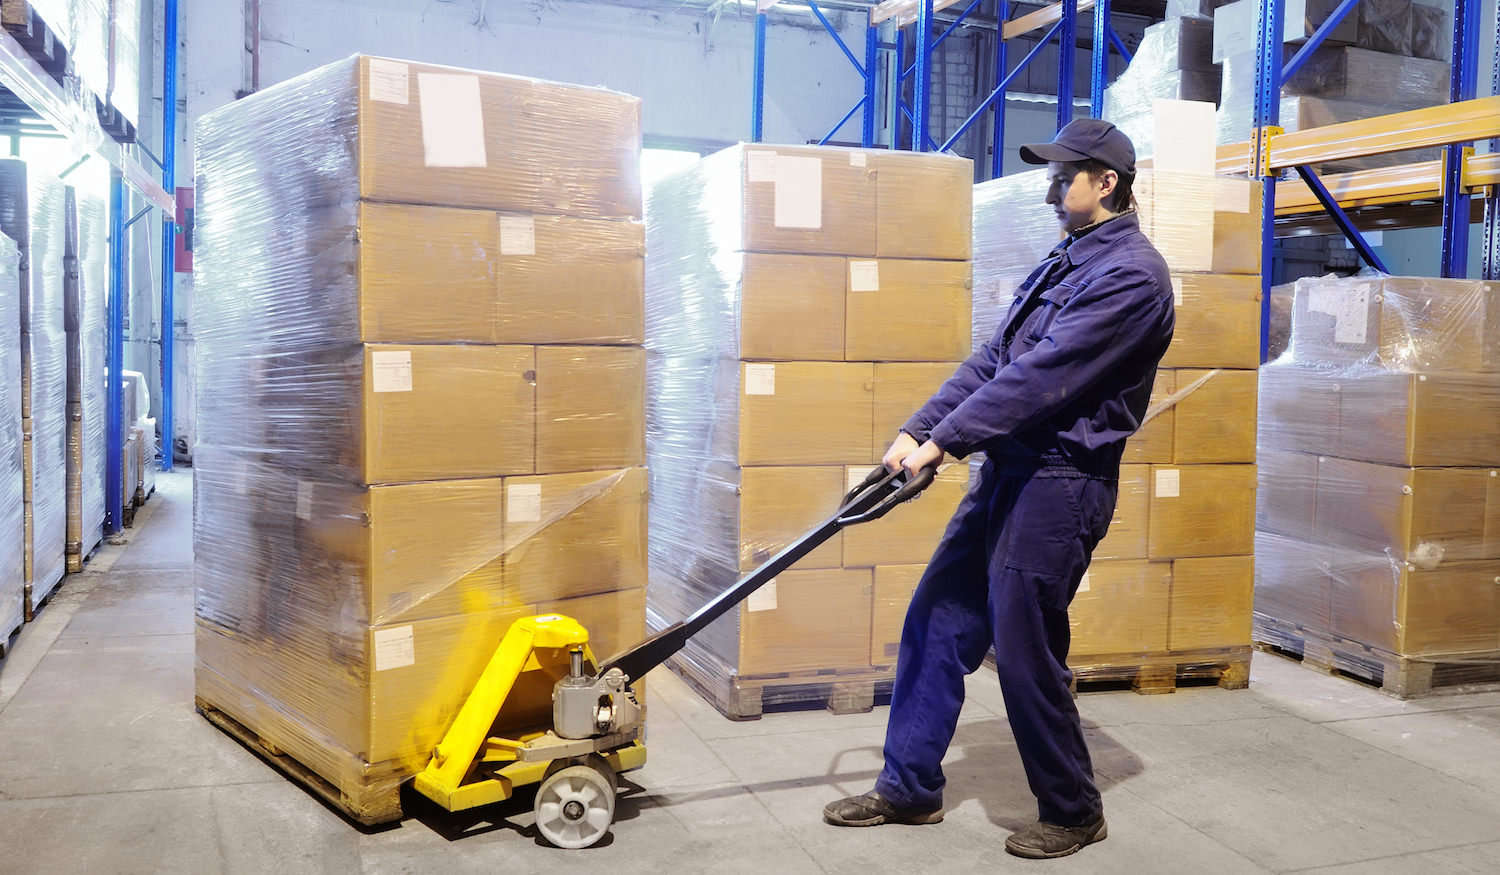 Know About Warehouse Solutions Used for Efficiency and Worker Safety